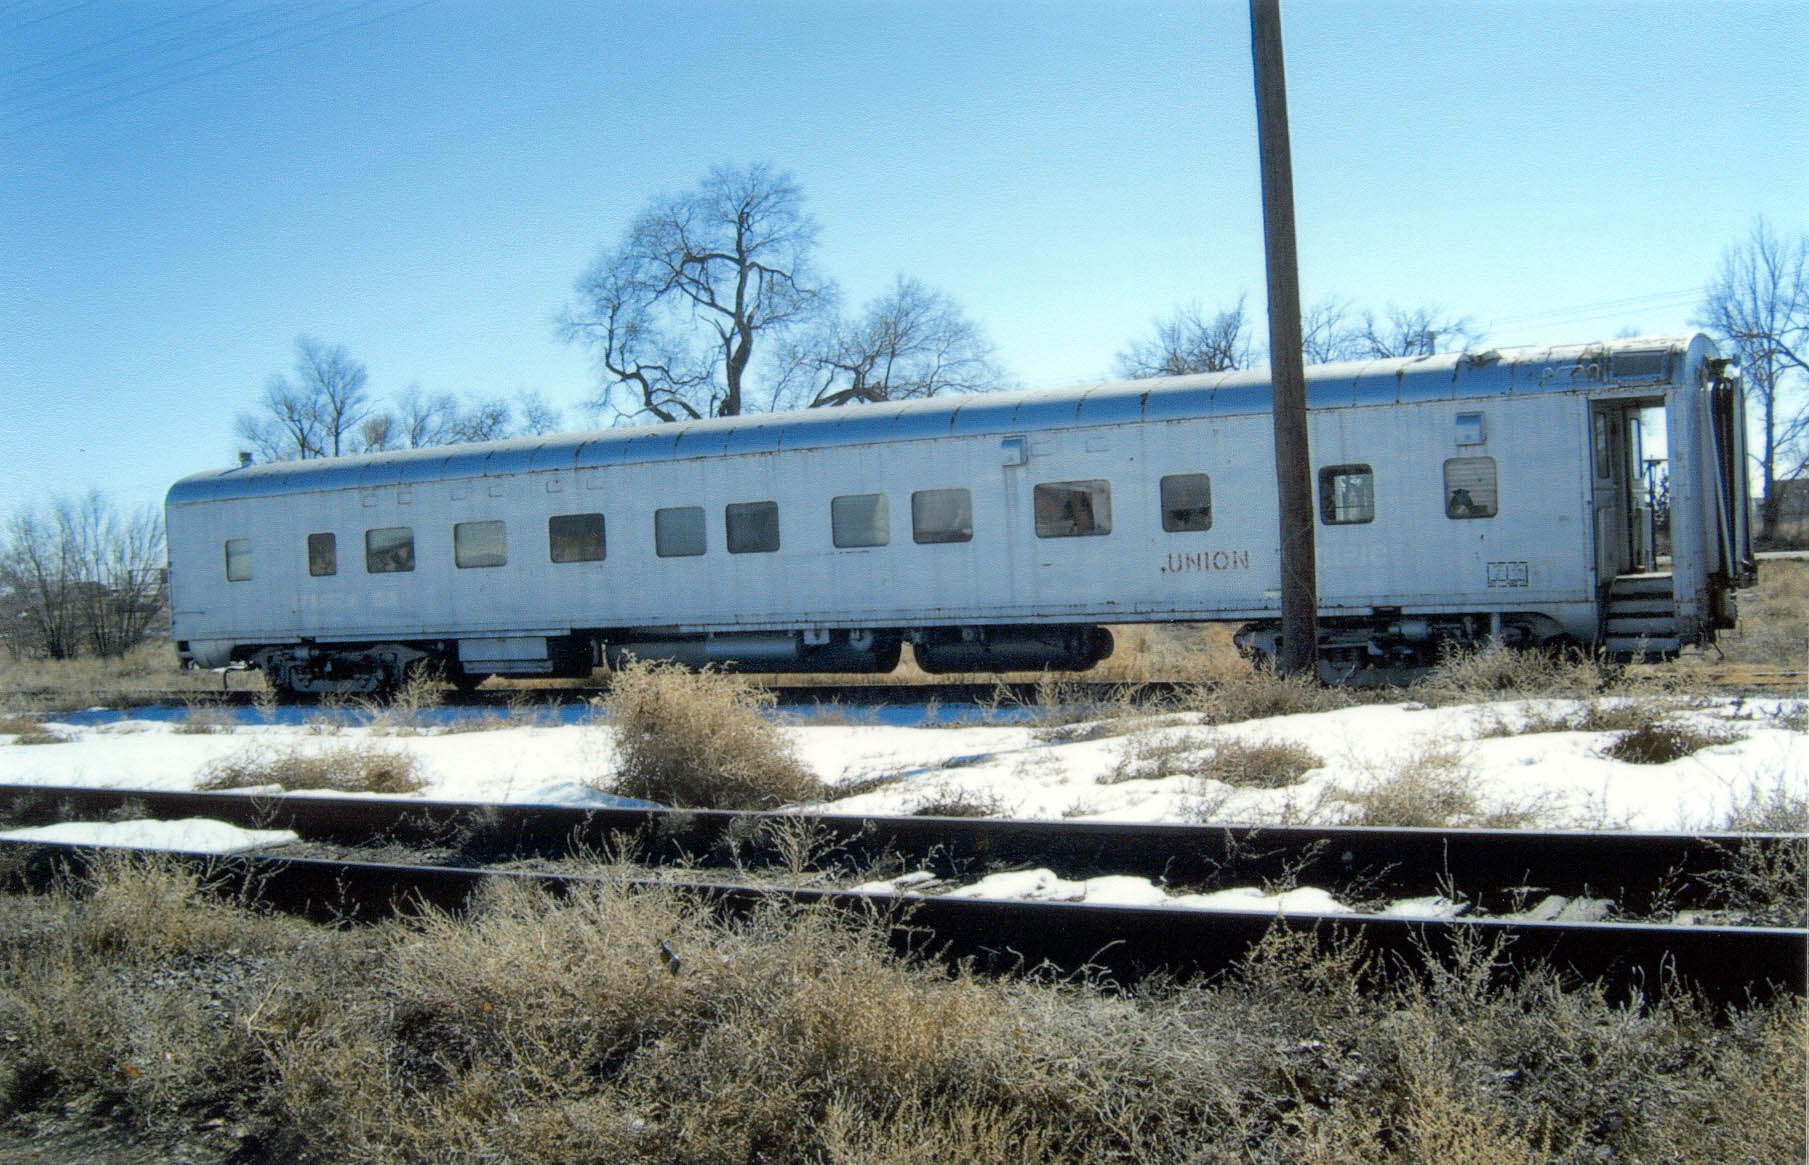 A 1953 Imperial Pullman railroad sleeper car was acquired by Crowley County for potential interpretation and reuse.